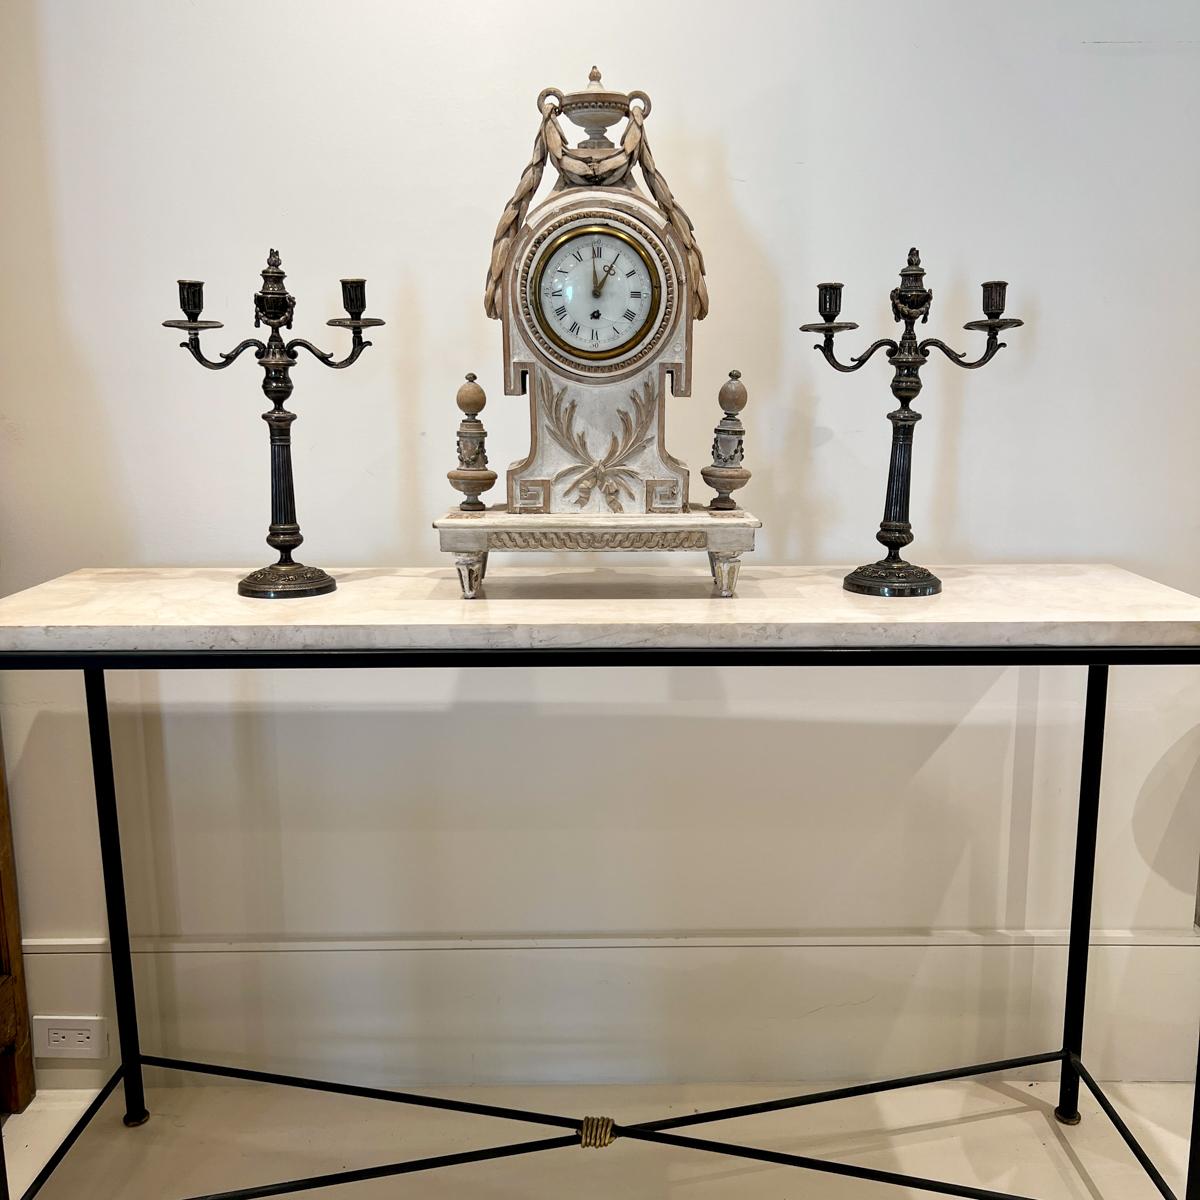 Very ornate white washed wood mantle clock with gold details. The face is behind a functional glass door with latch. The top is crowned by an urn with a cascading laurel garland that falls to either side of the case. There are pretty finials at the